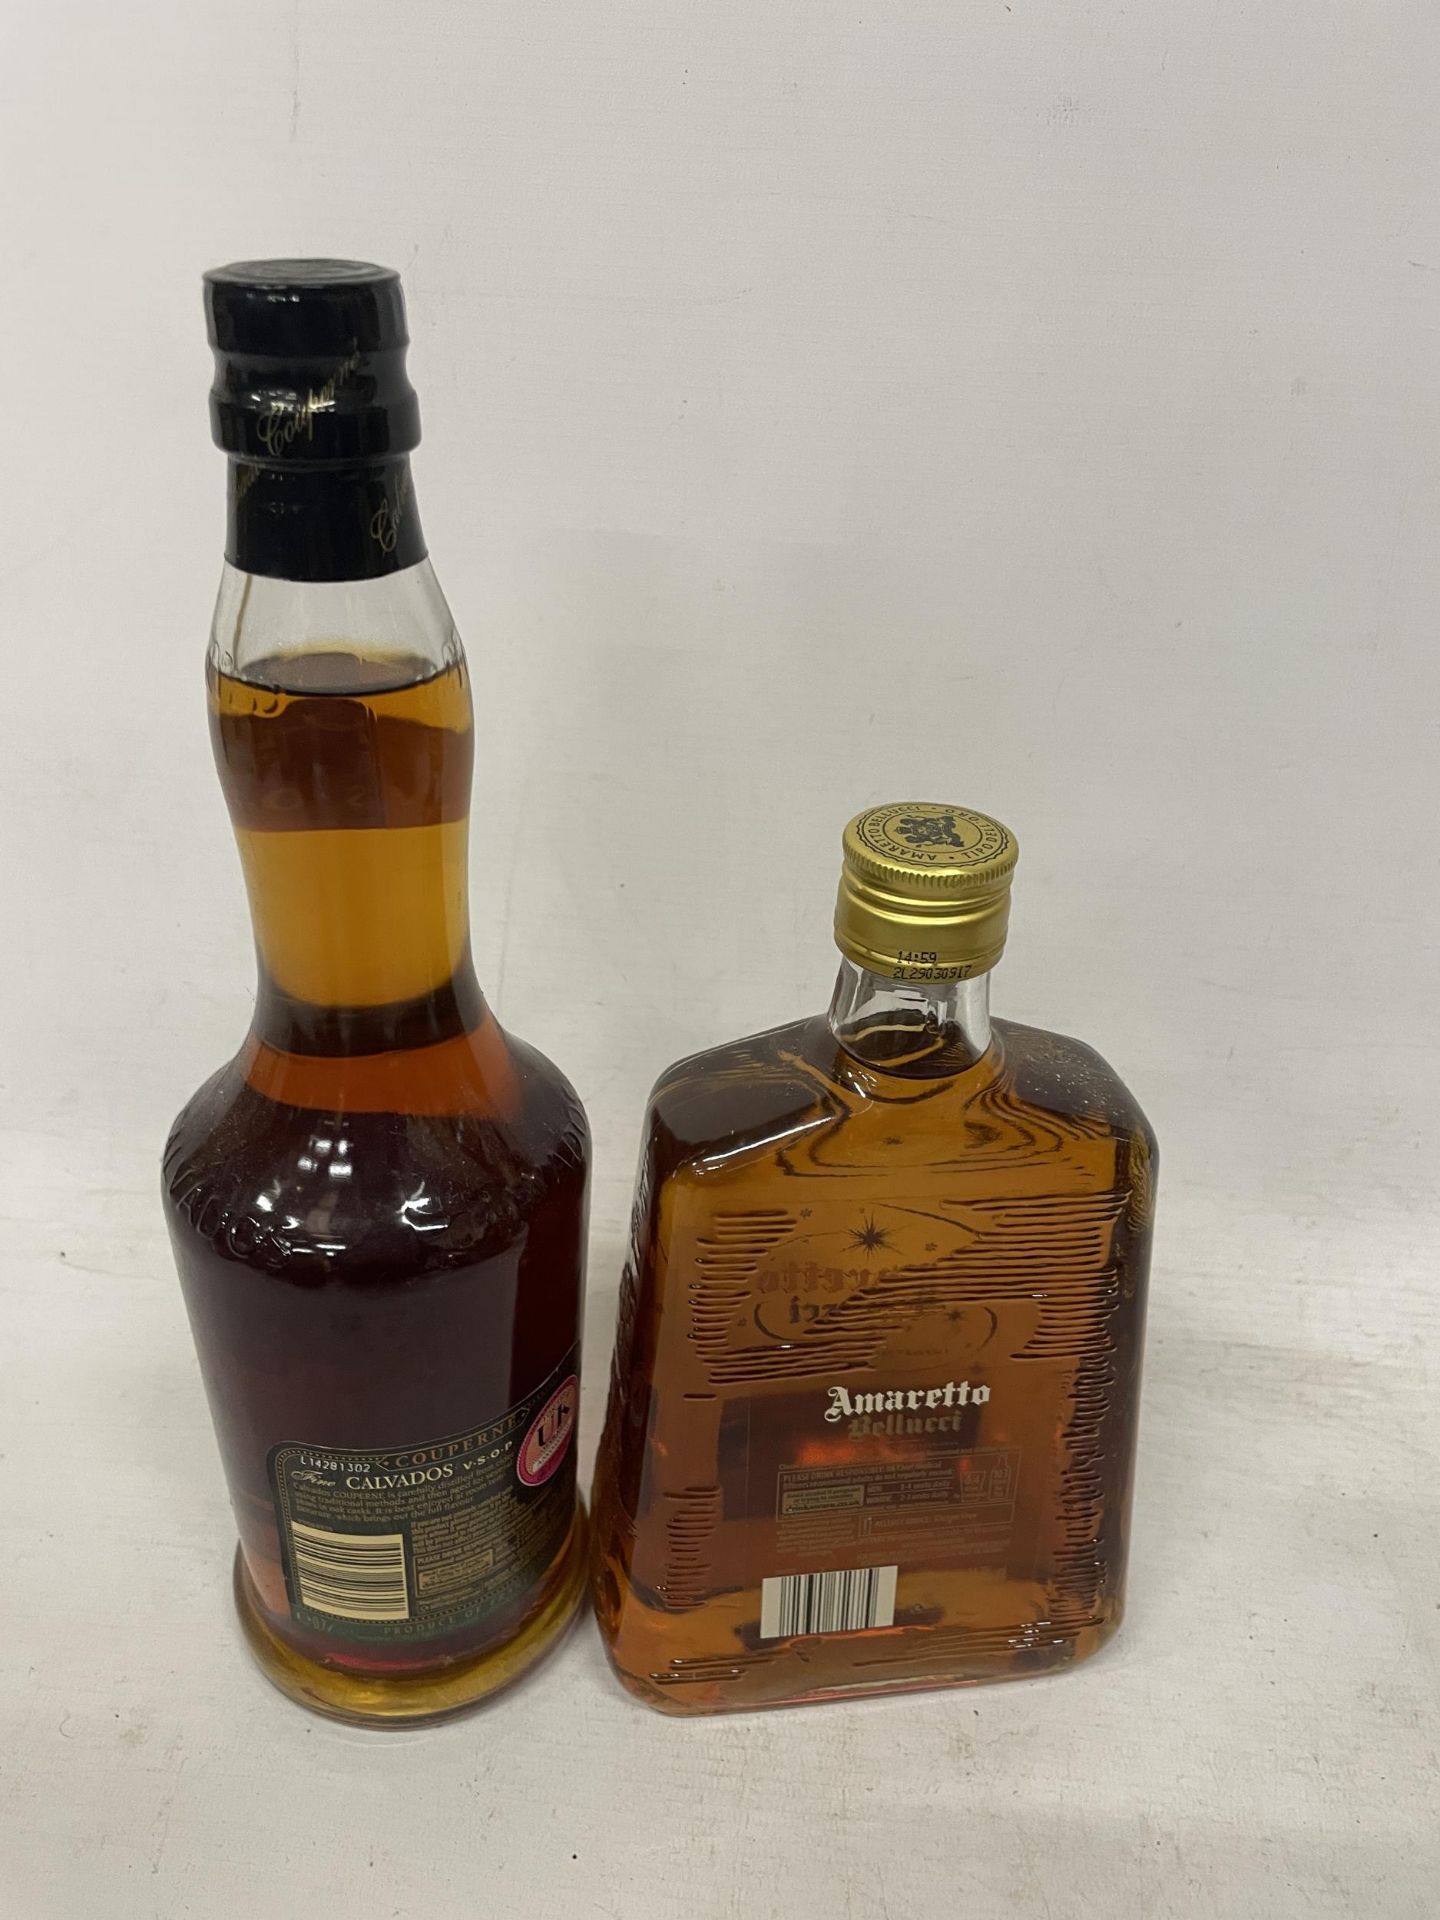 TWO BOTTLES - 70CL AMARETTI BELLUCCI AND 70CL CALVADOS V.S.O.P COUPERNE - Image 2 of 2